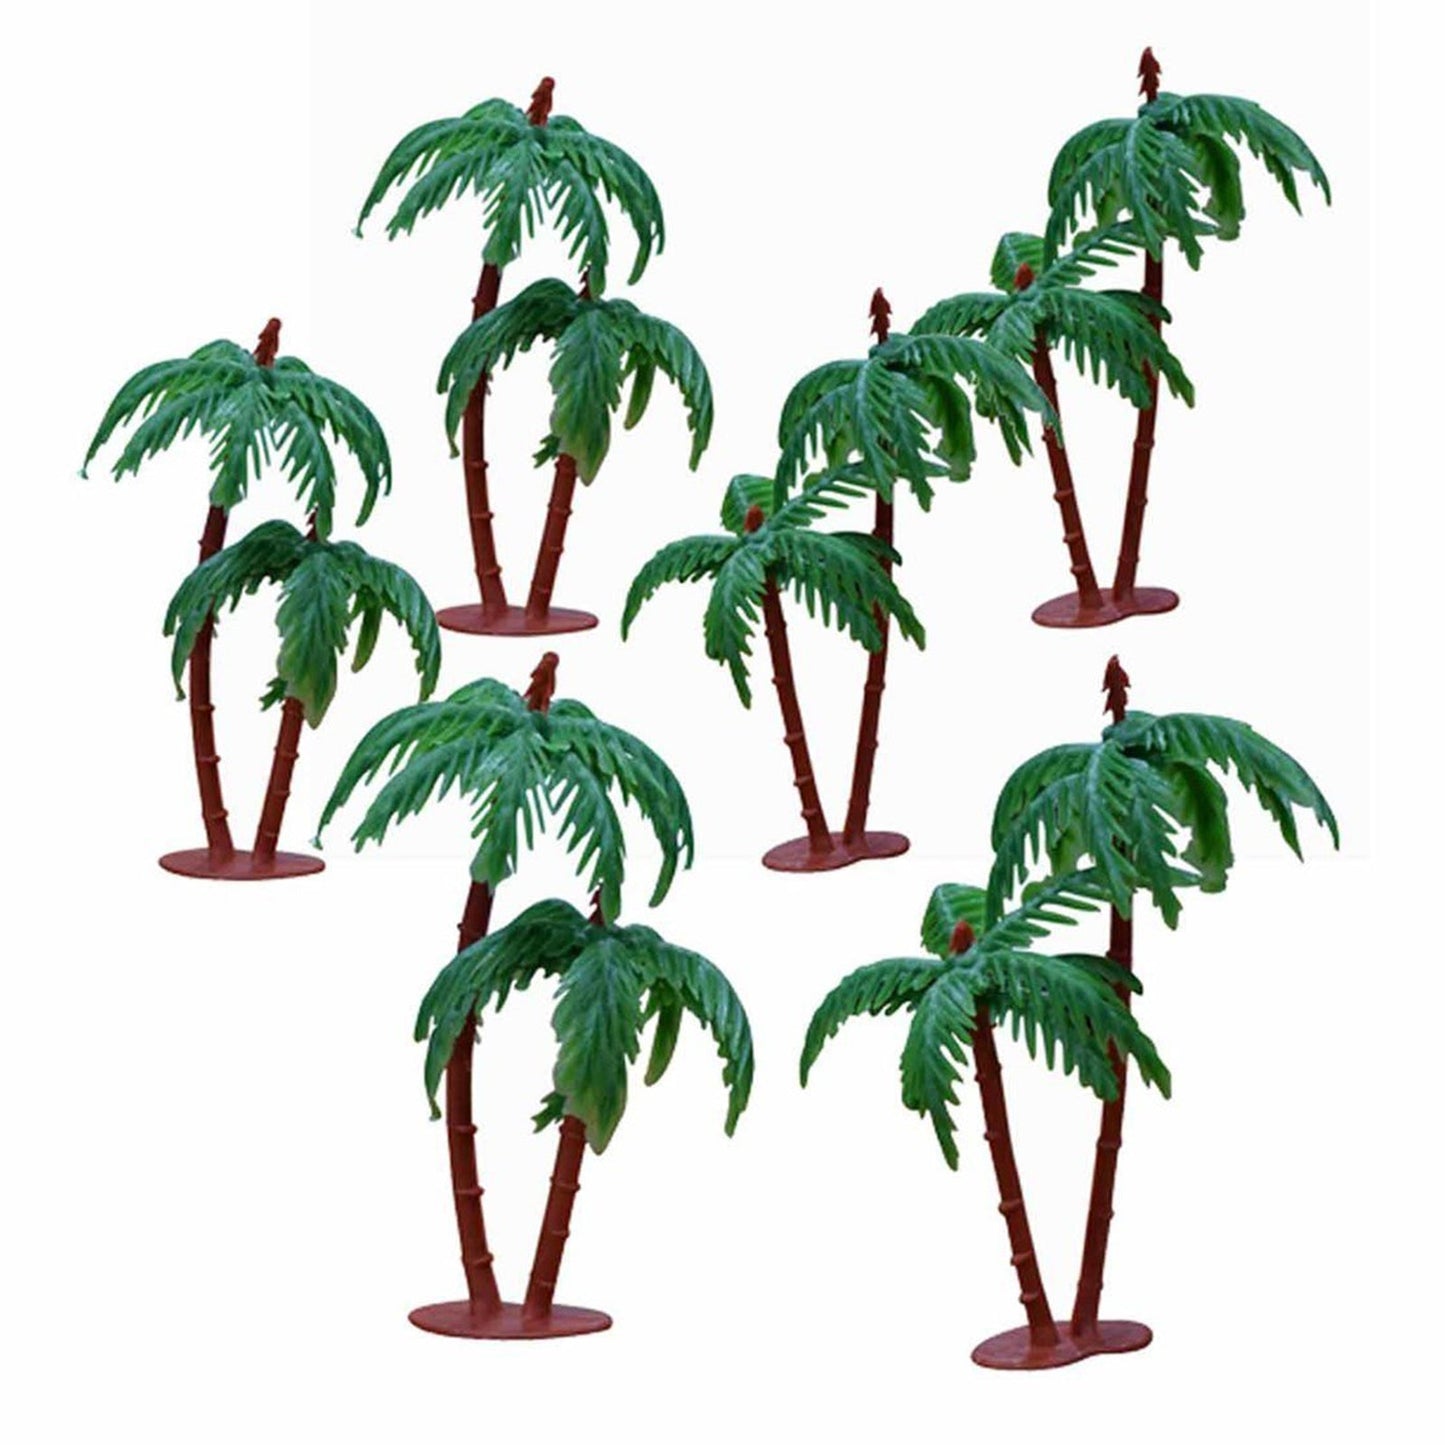 Artificial Mini Tree 4 Inches, Pack of 6 Trees (Coconut)